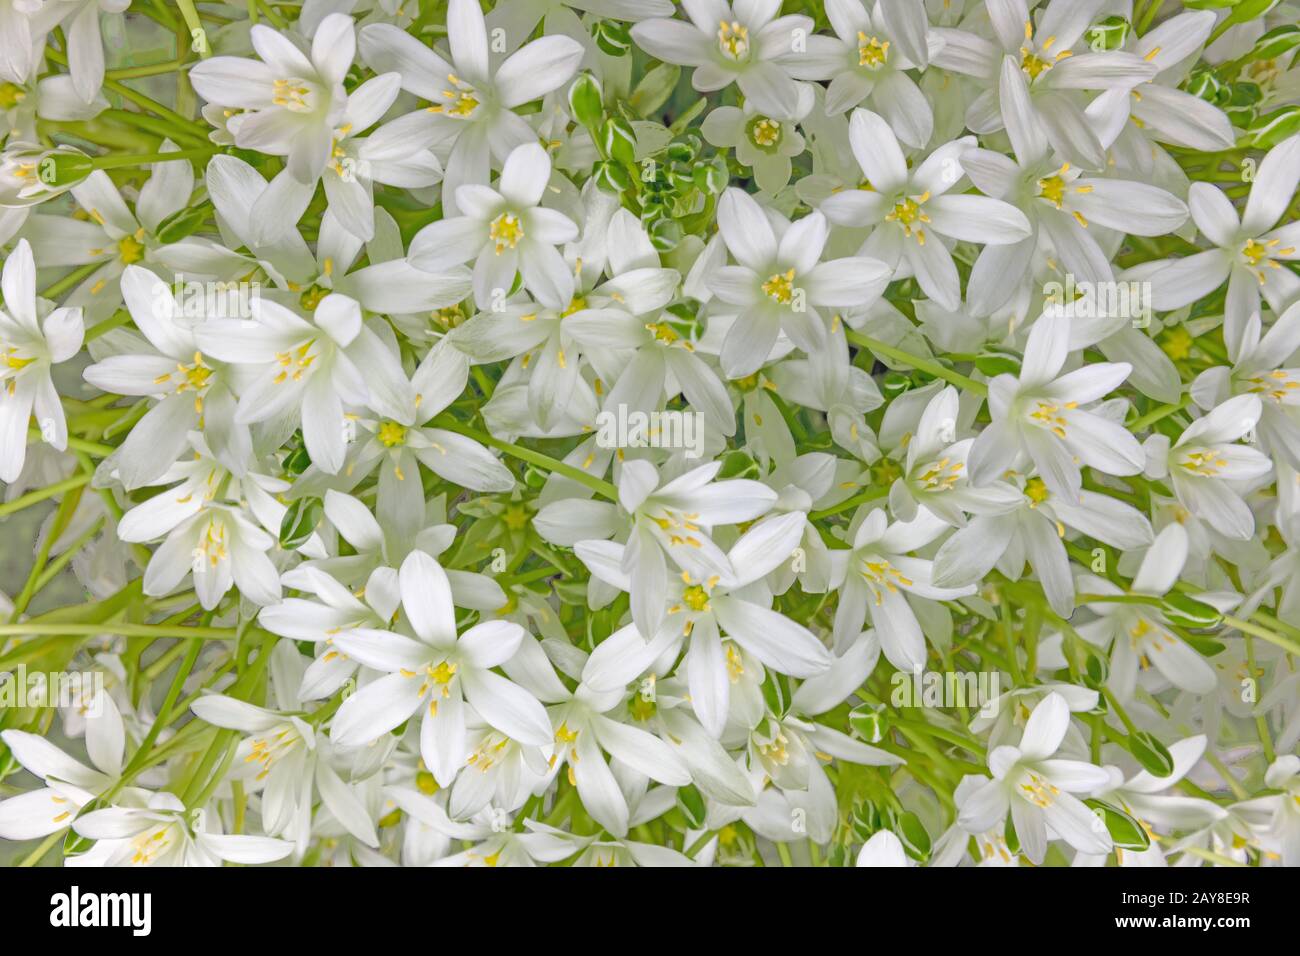 Soft, bright floral background from many umbels of daisy flowers Stock Photo